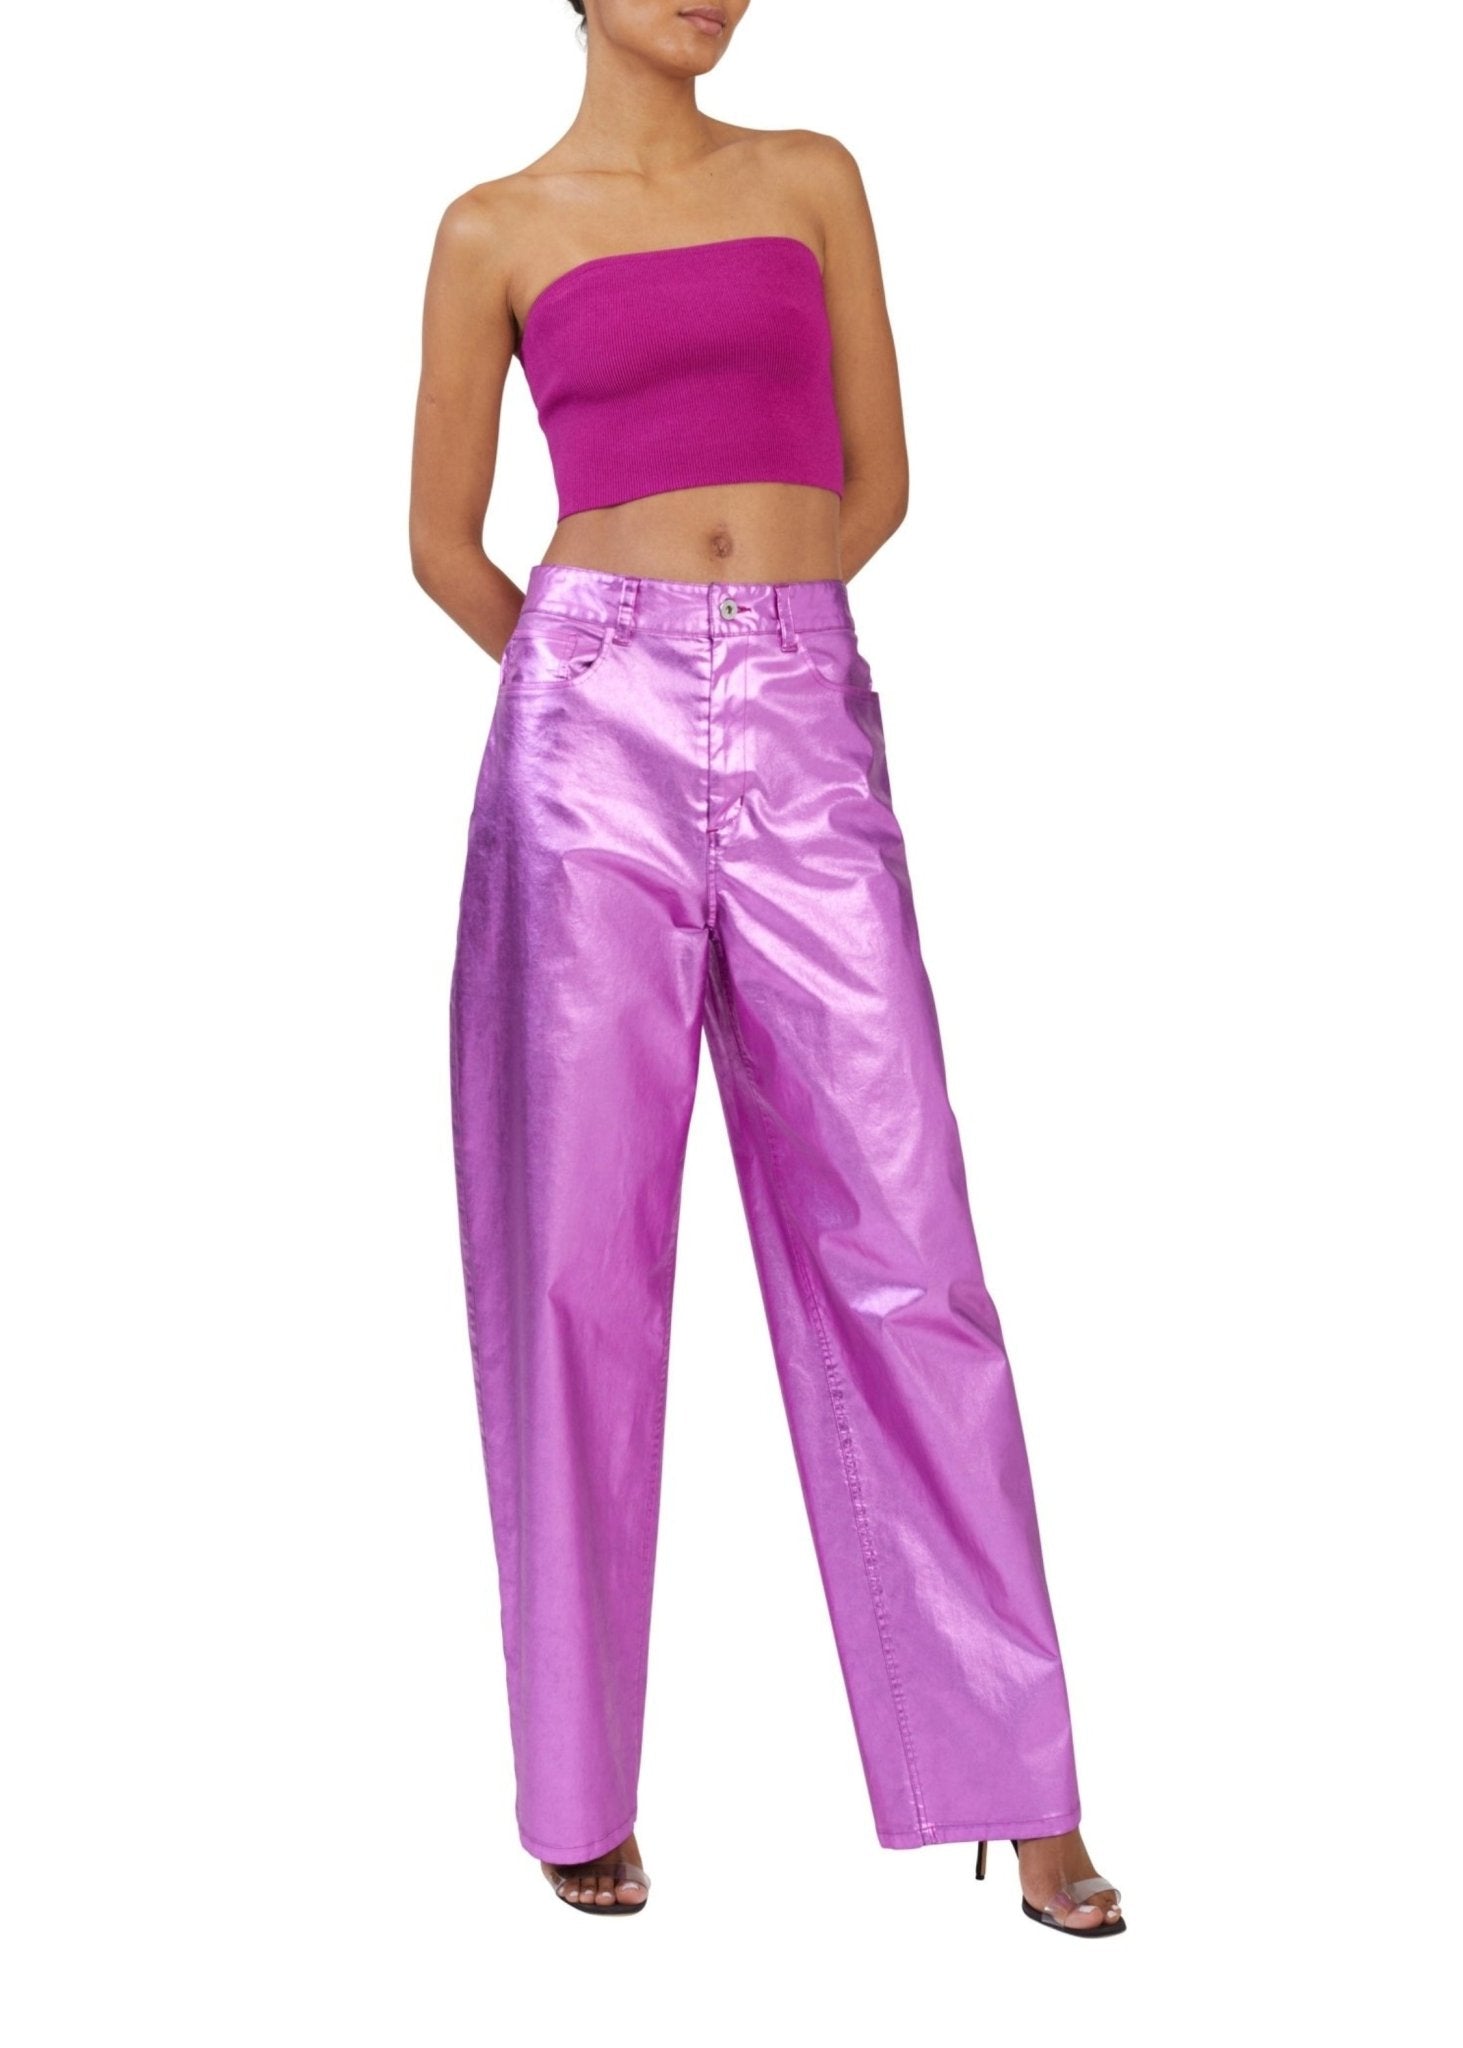 Compact Knit Tube Top in Neon purple | LAPOINTE